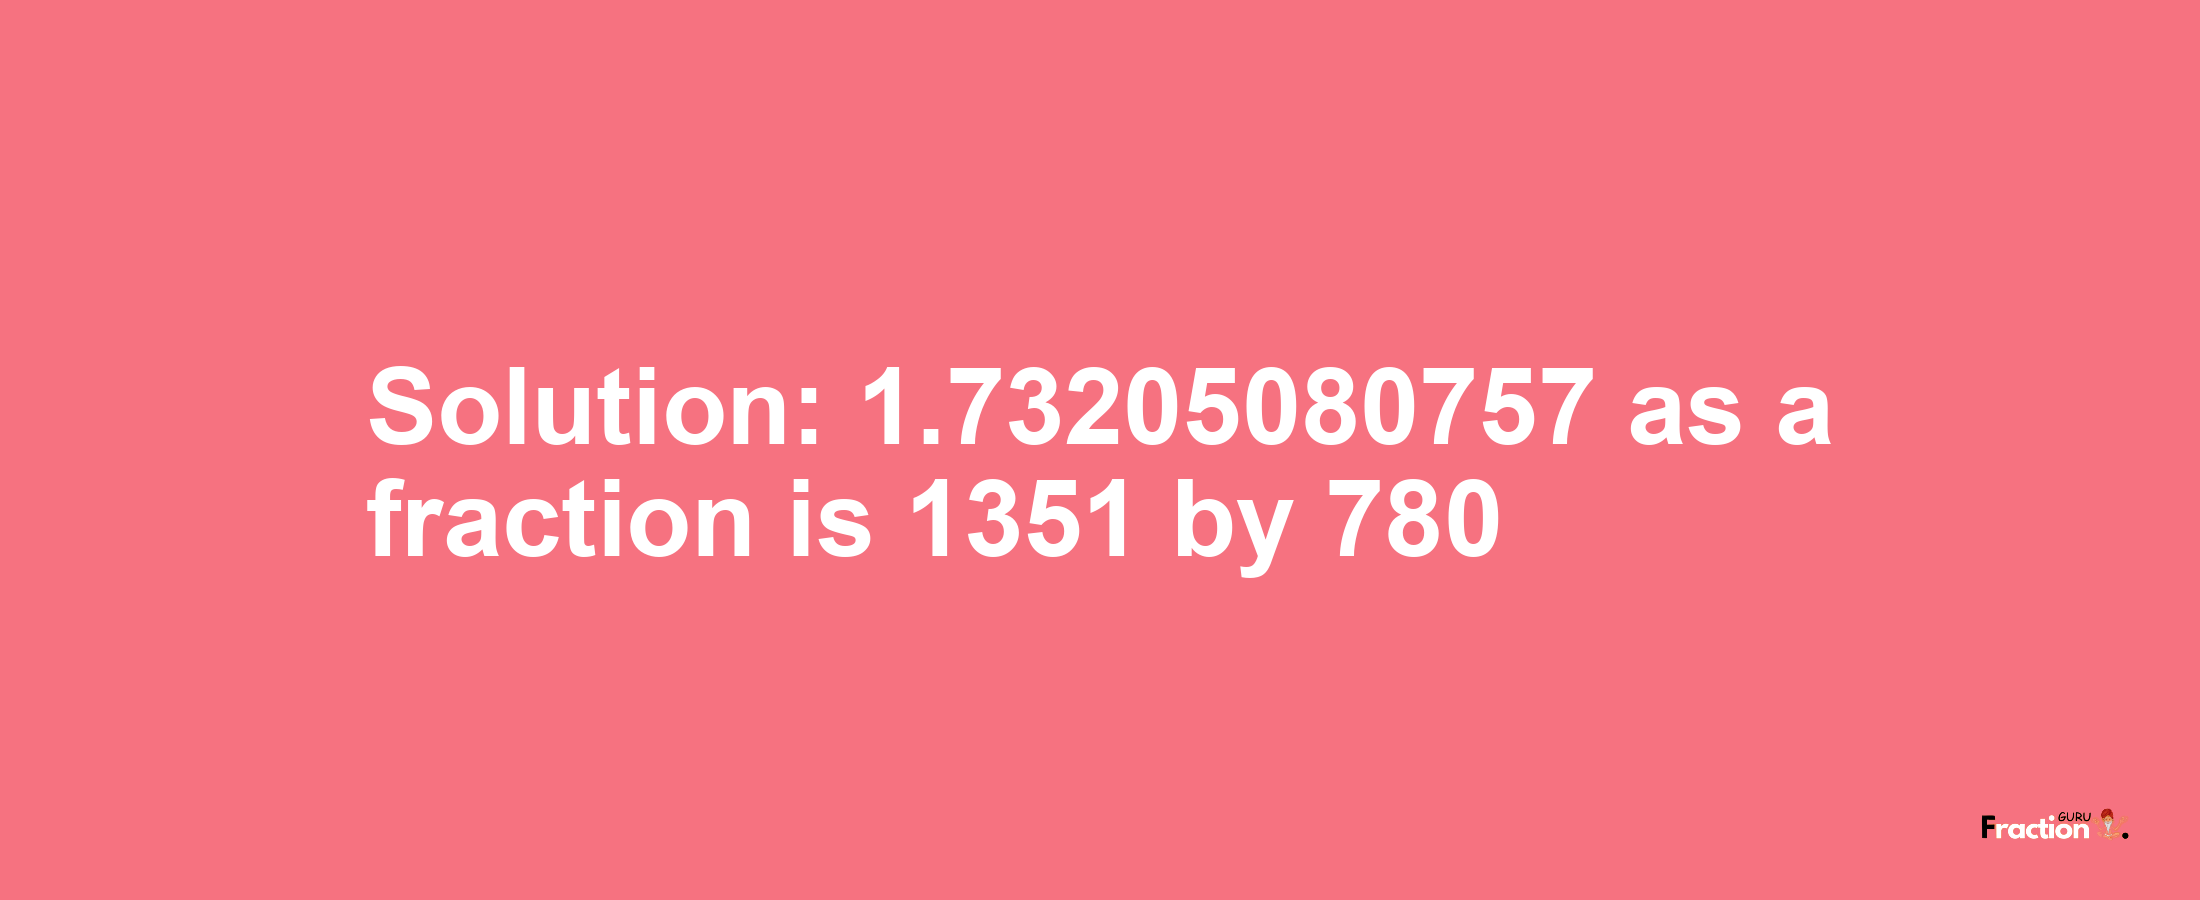 Solution:1.73205080757 as a fraction is 1351/780